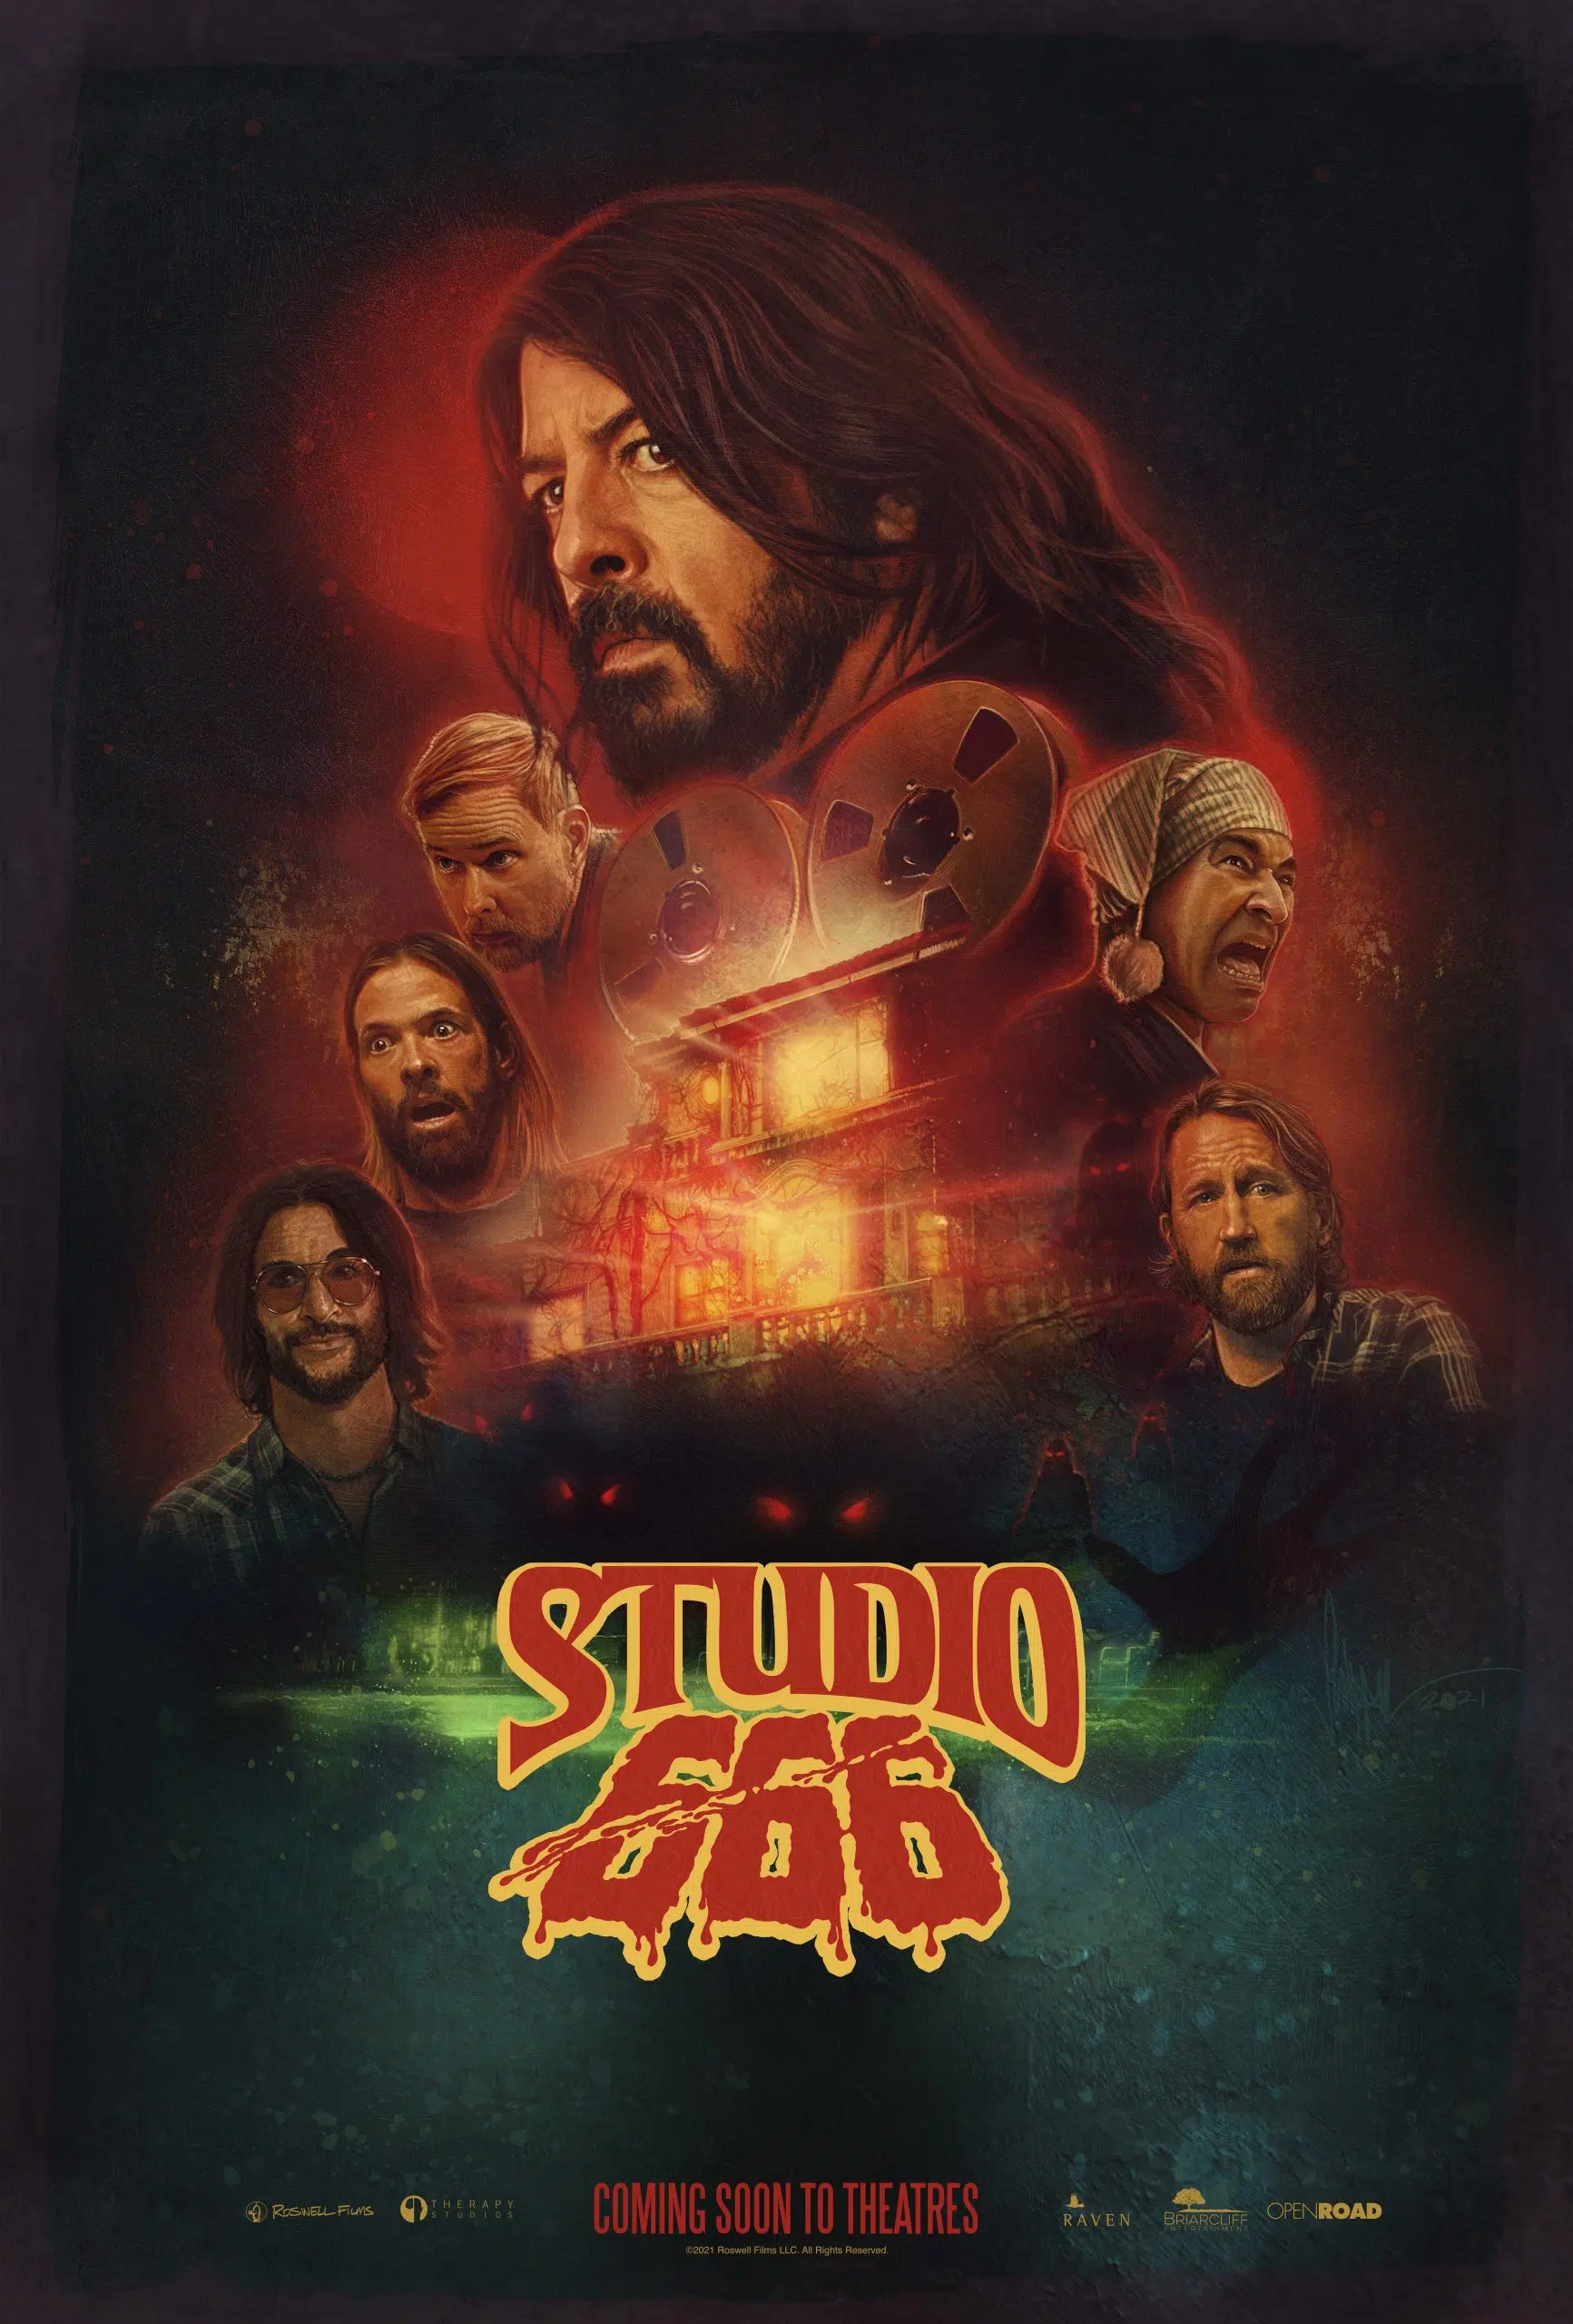 I THINK DAVE GROHL WANTS TO BE BRUCE CAMPBELL!